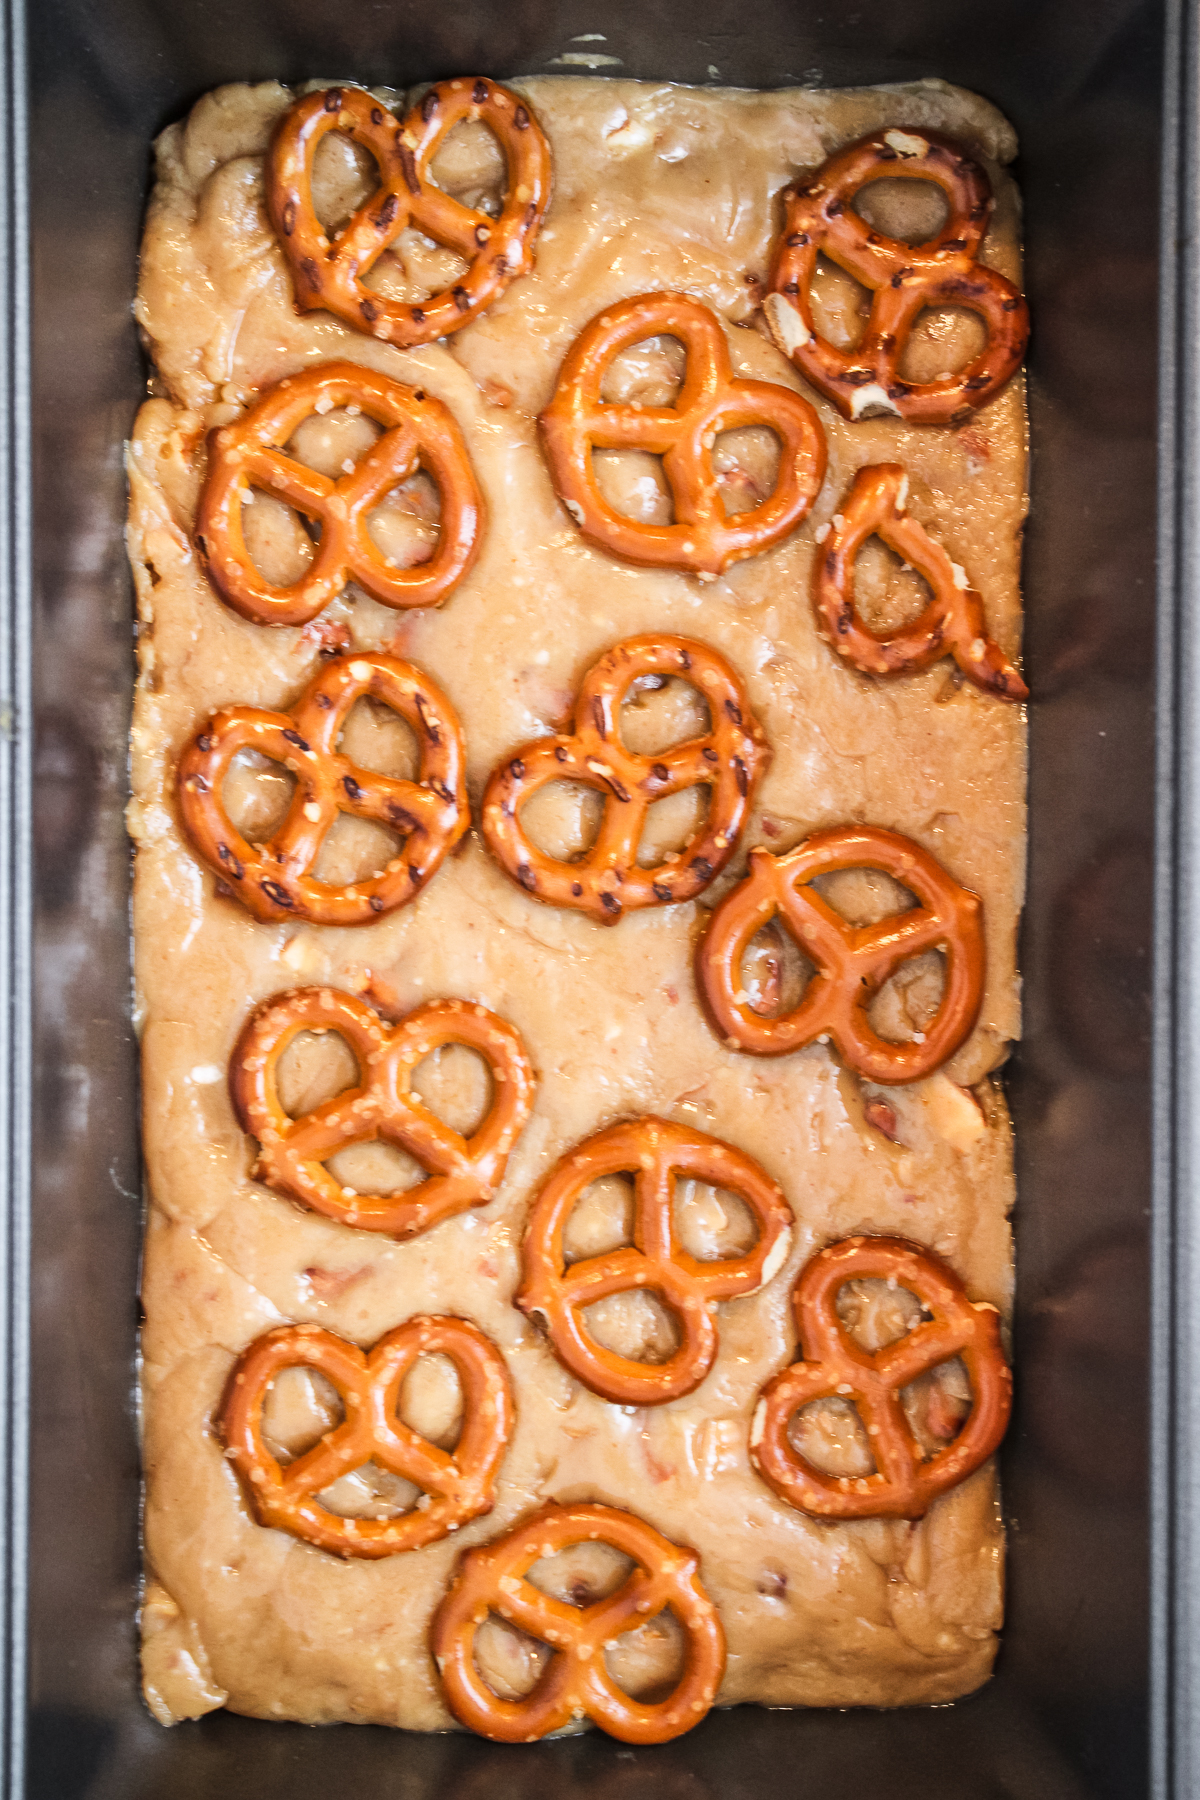 Mini pretzel twists are scattered all over the top of the peanut butter fudge and gently pressed in to stick.